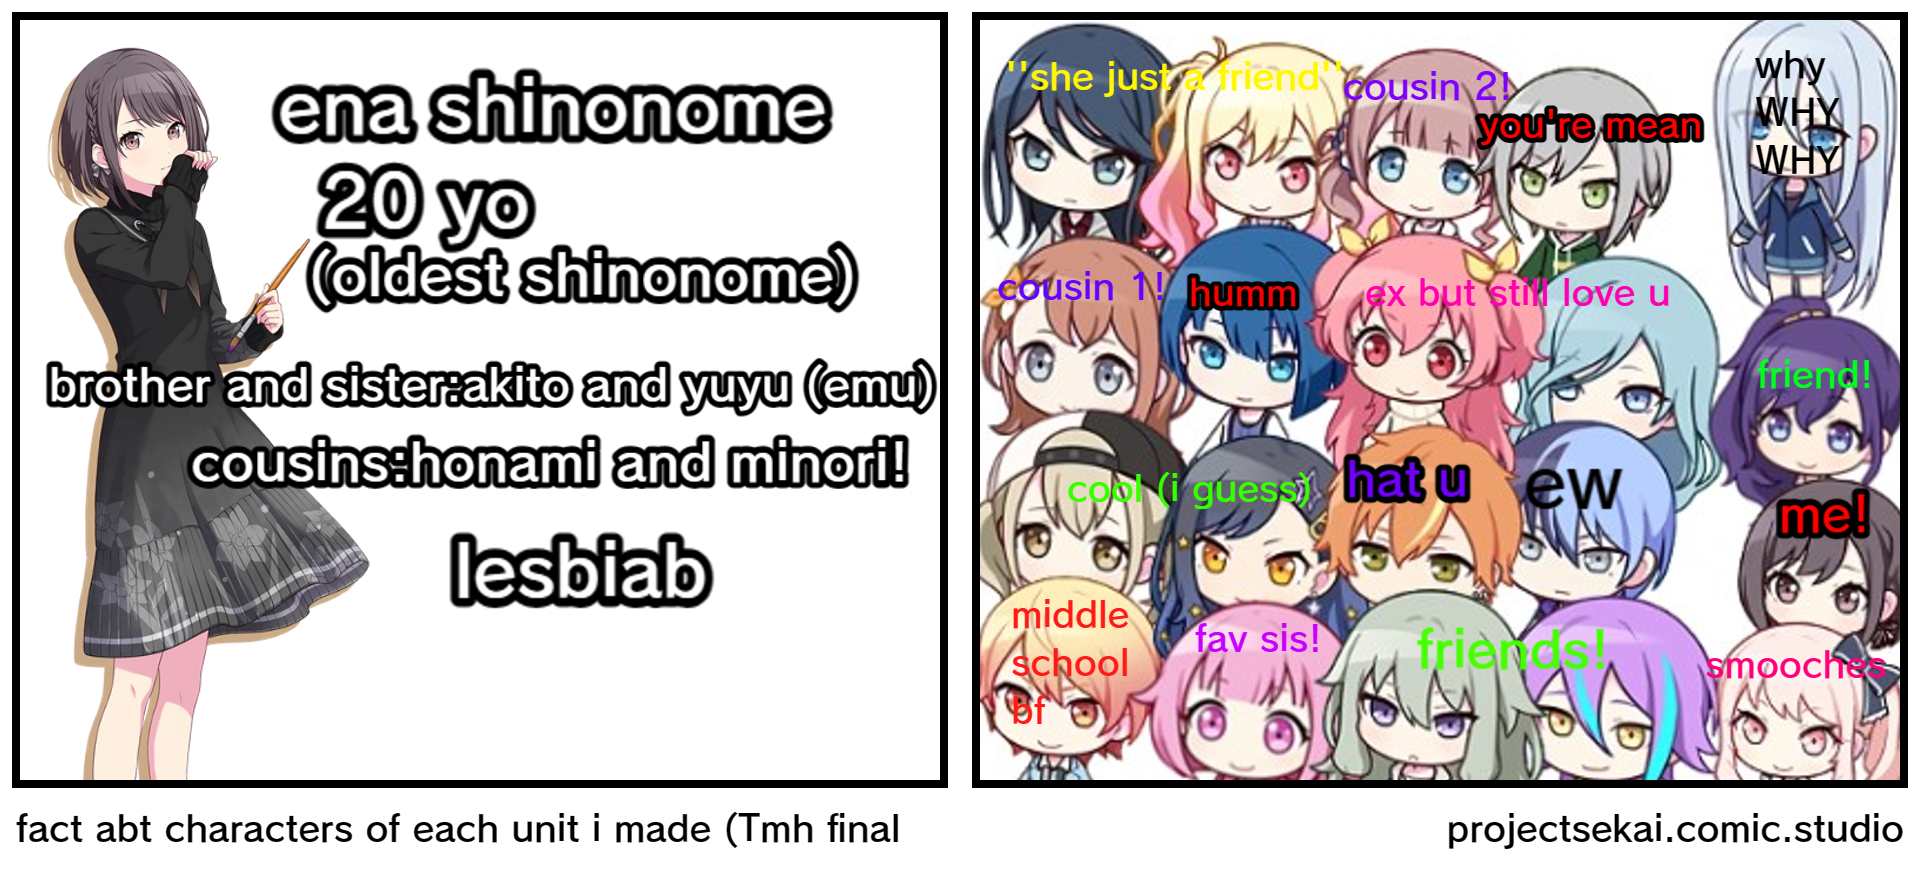 fact abt characters of each unit i made (Tmh final